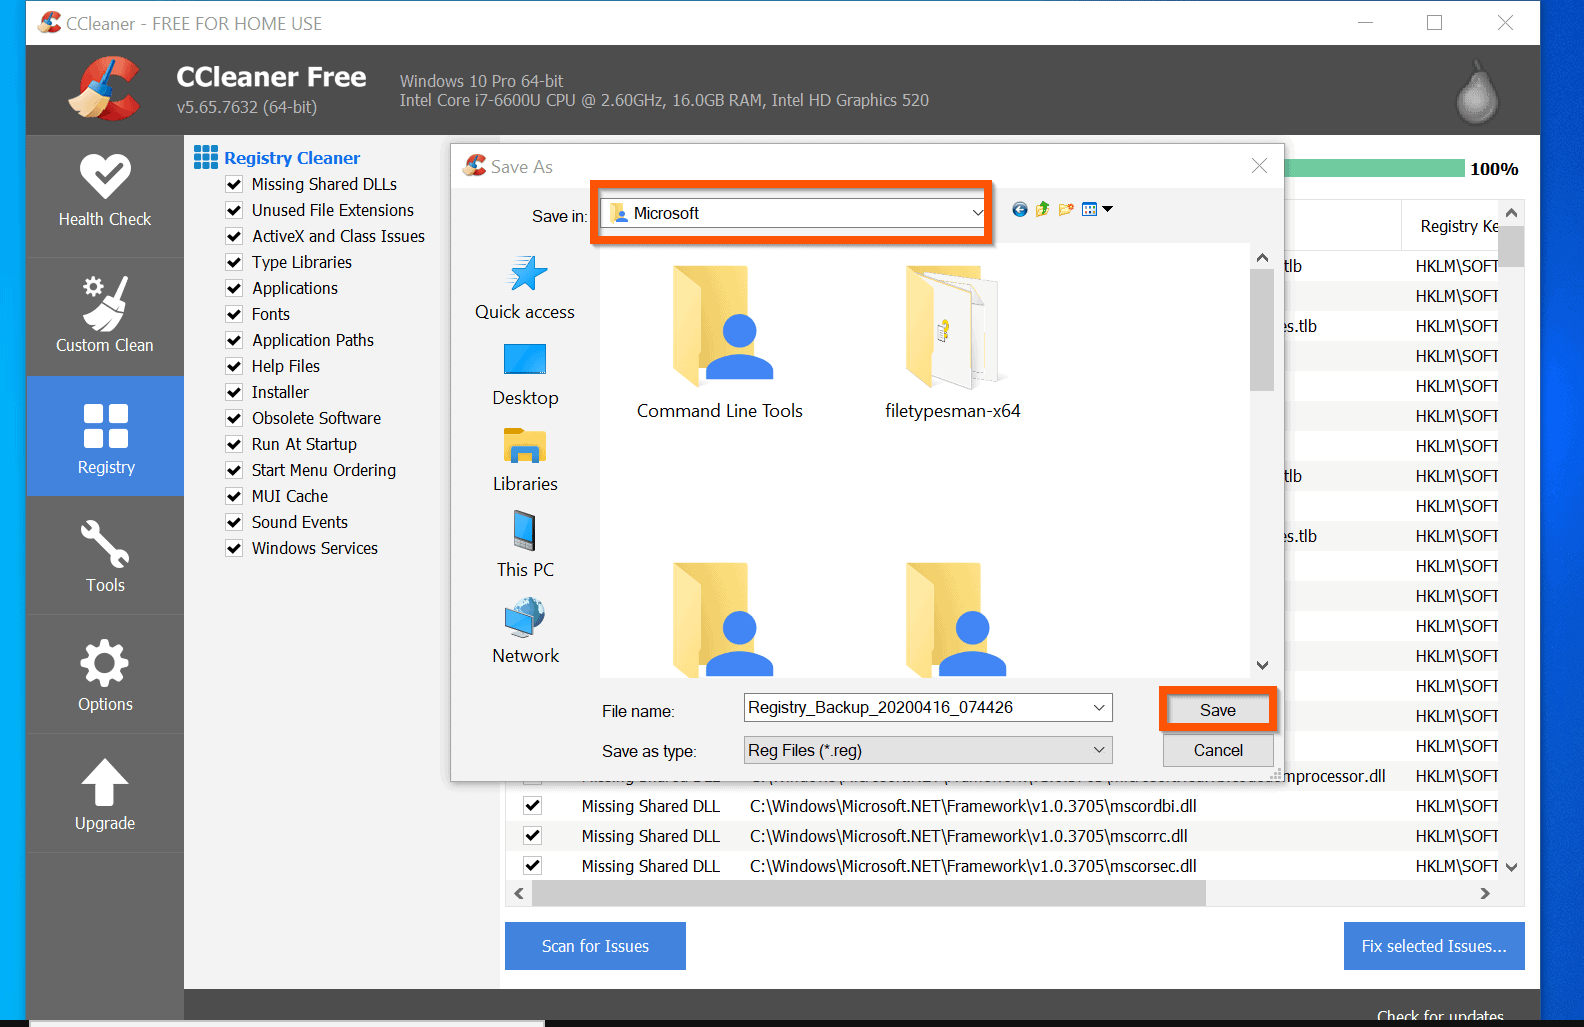 ccleaner cloud create restore point before